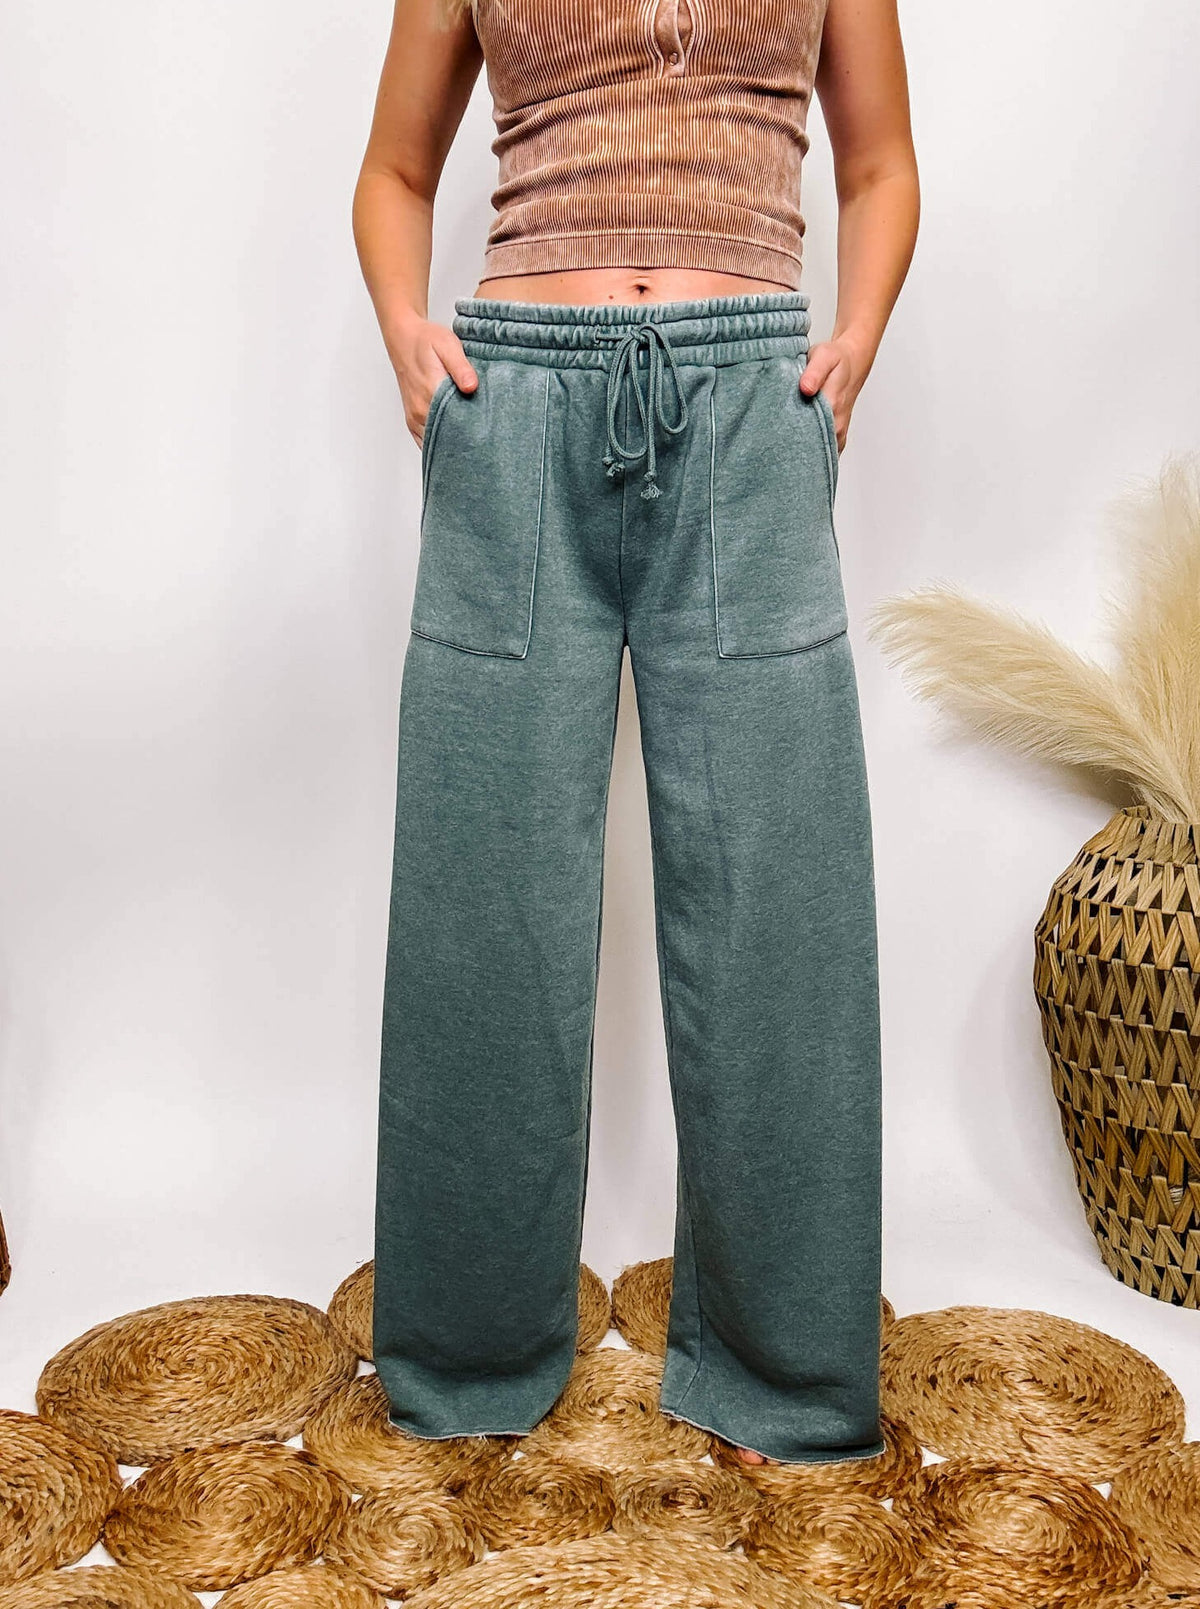 Hyfve Washed Grey Sage Green Wide Leg Pants Elastic Drawstring Waistband Side Pockets Fleece Lined Relaxed Loose Fit 51% Cotton, 49% Polyester